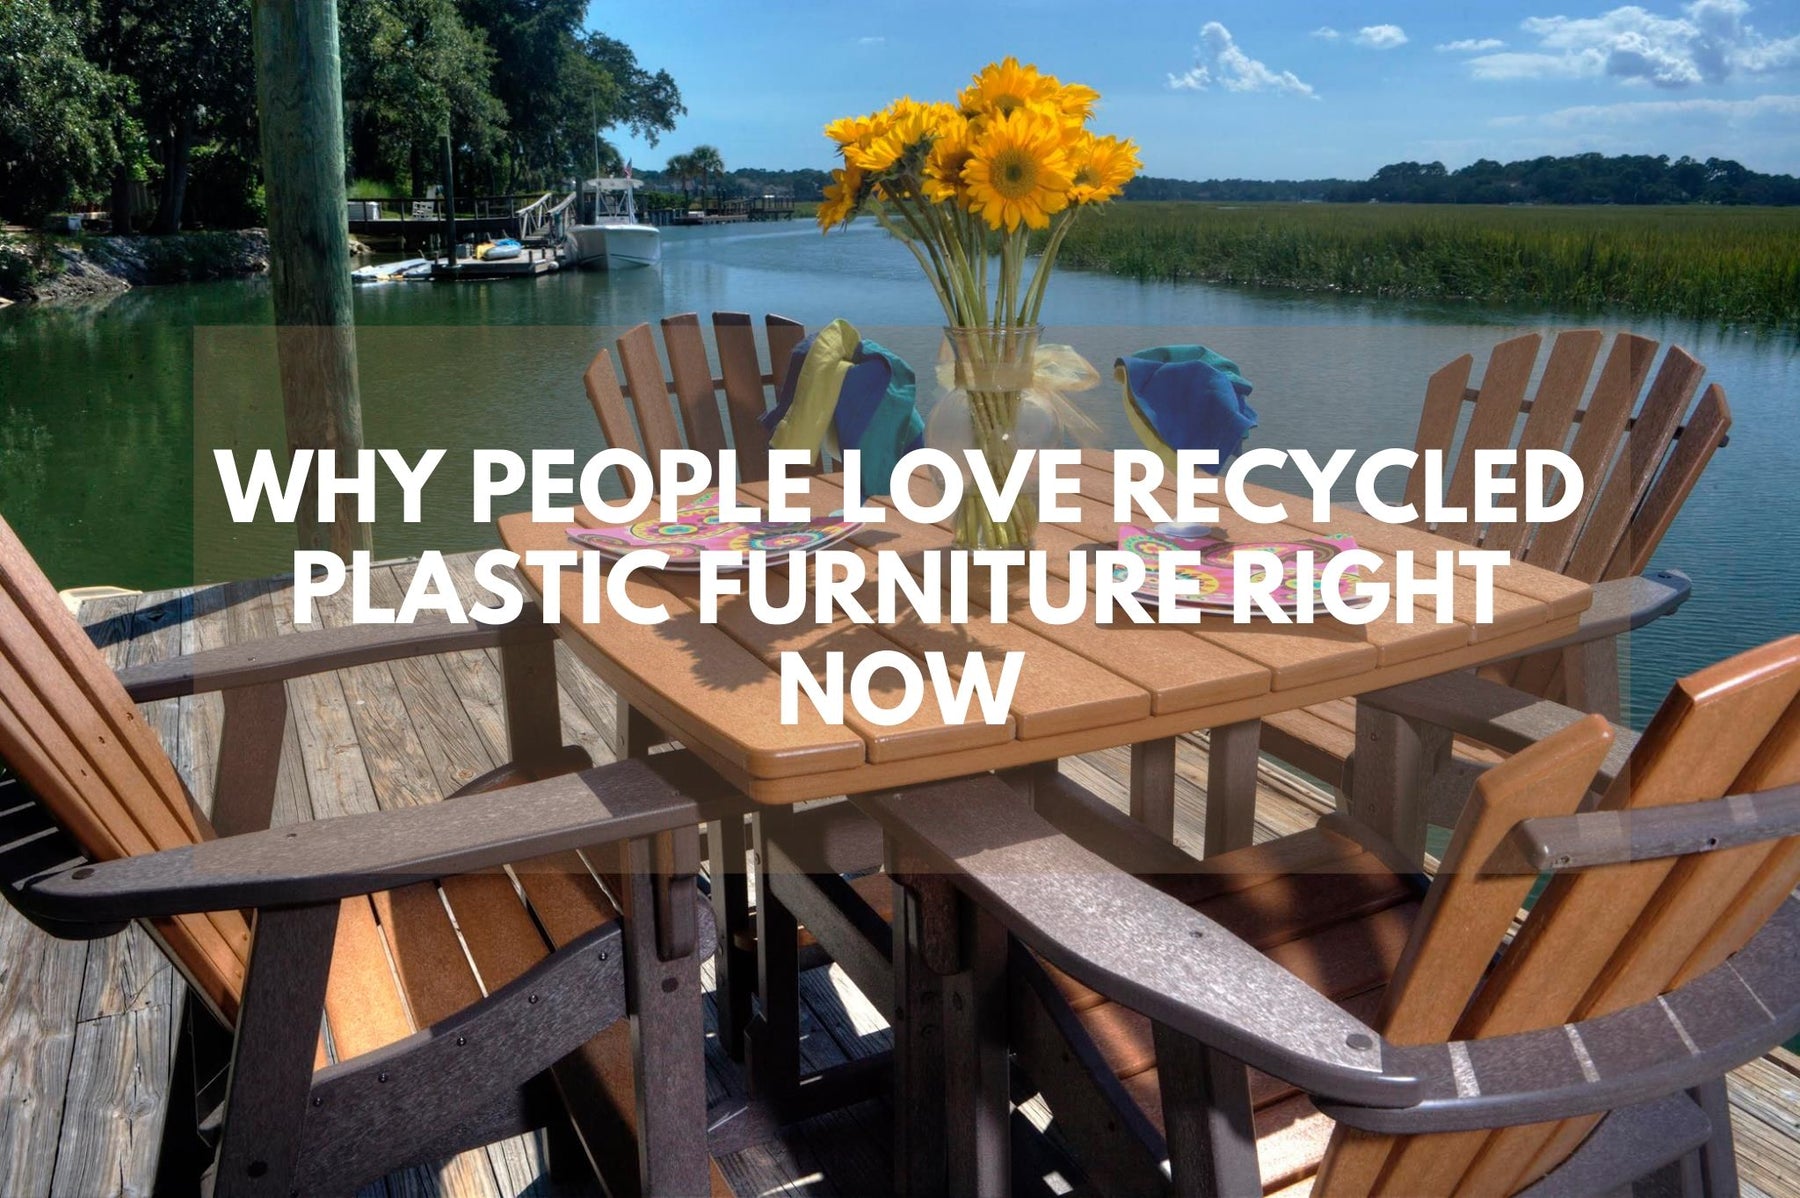 Why People Love Recycled Plastic Furniture Right Now